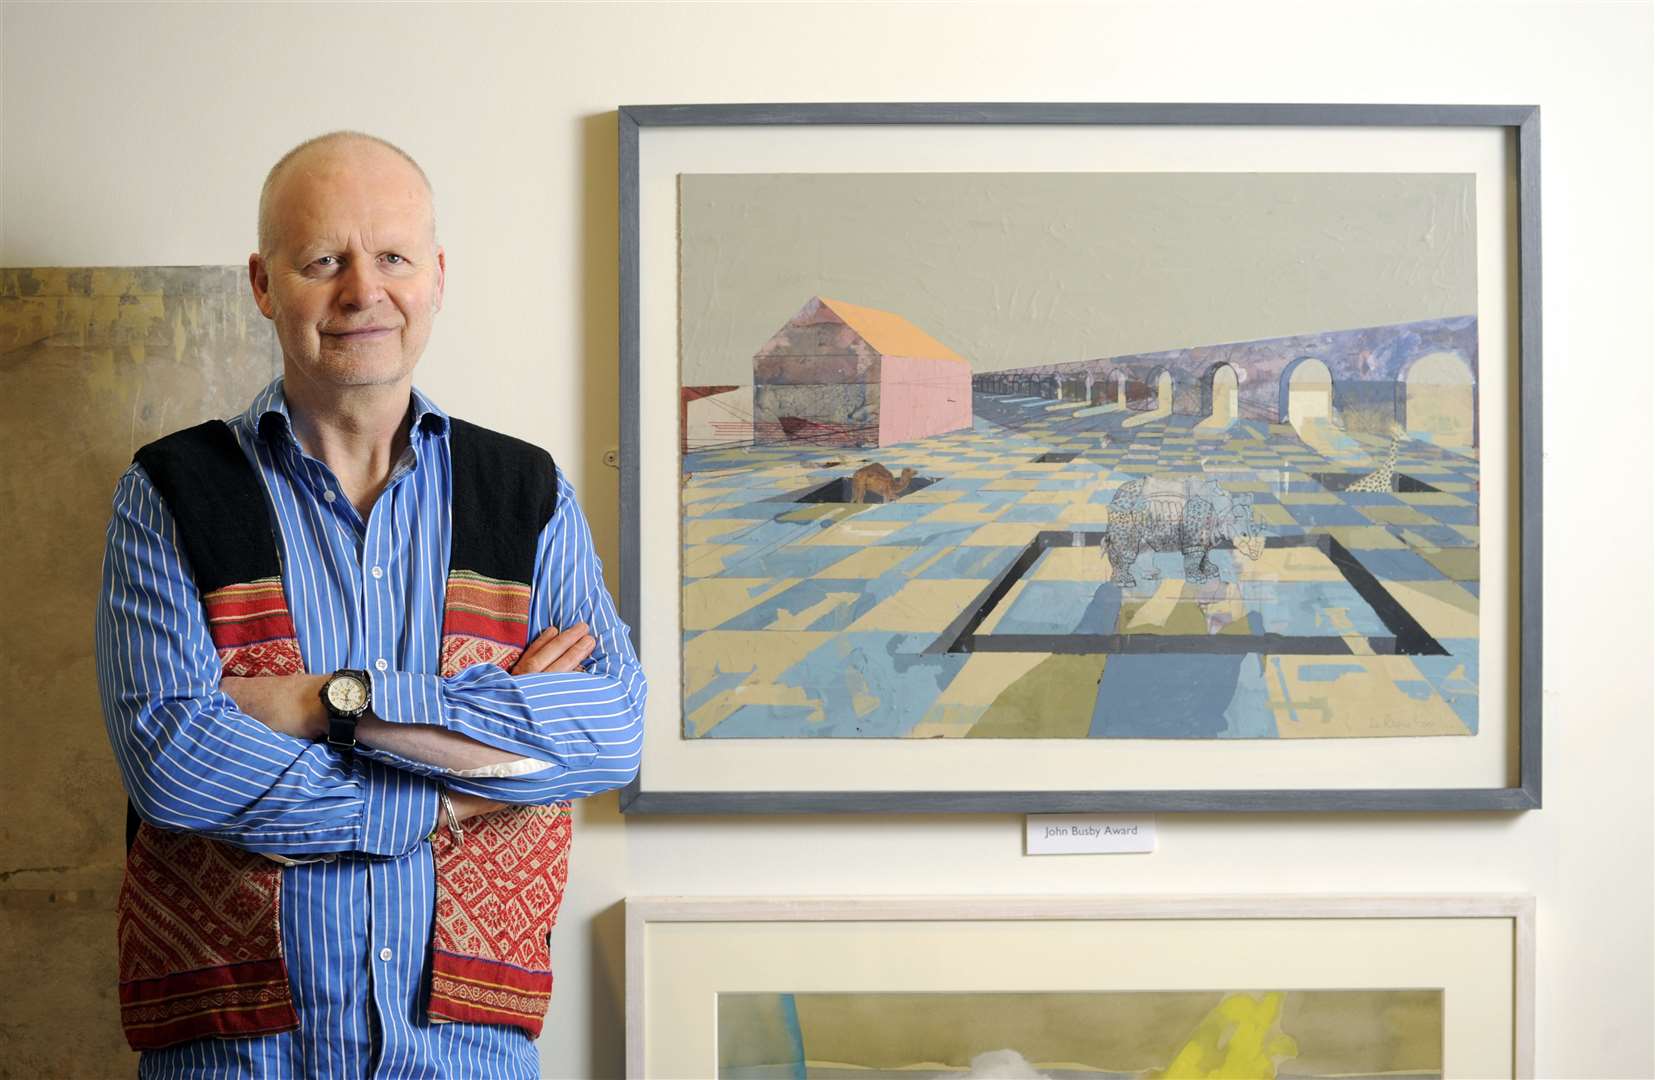 The John Busby Award winner Kenneth Le Riche with his work, "Space as Artifice with Durer's Rhino", at the Royal Scottish Society of Painters in Watercolour Open Annual Exhibition, in Edinburgh. Picture: Colin Hattersley.